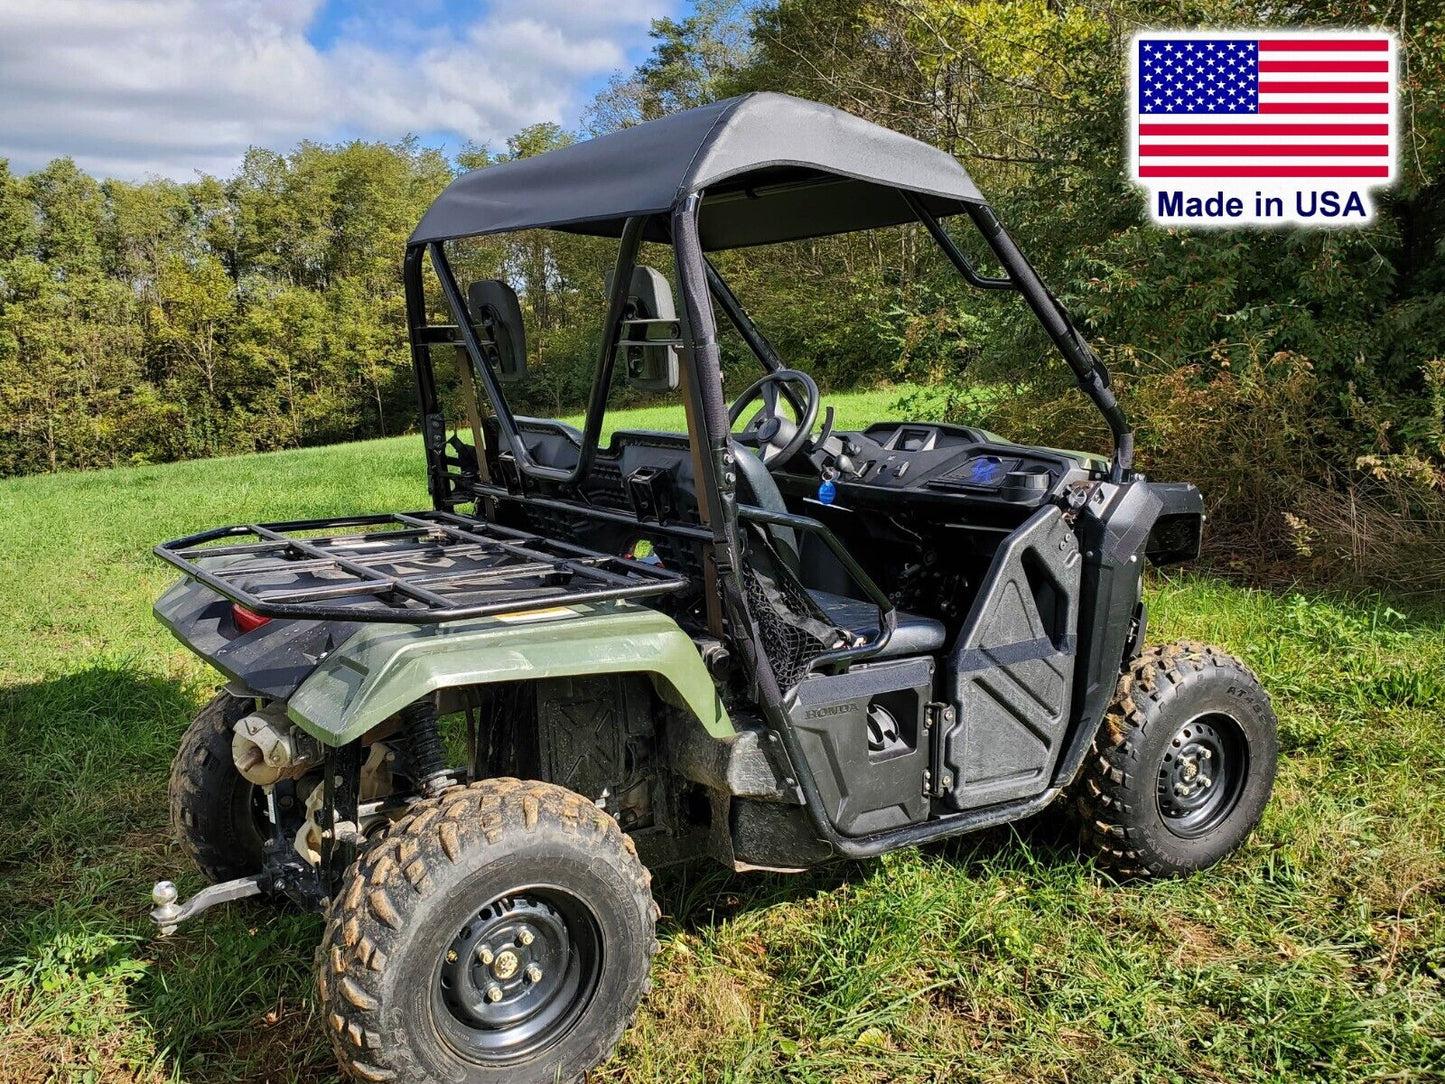 ROOF for Honda Pioneer 500 - Canopy - Soft Top - Withstands Highway Speeds